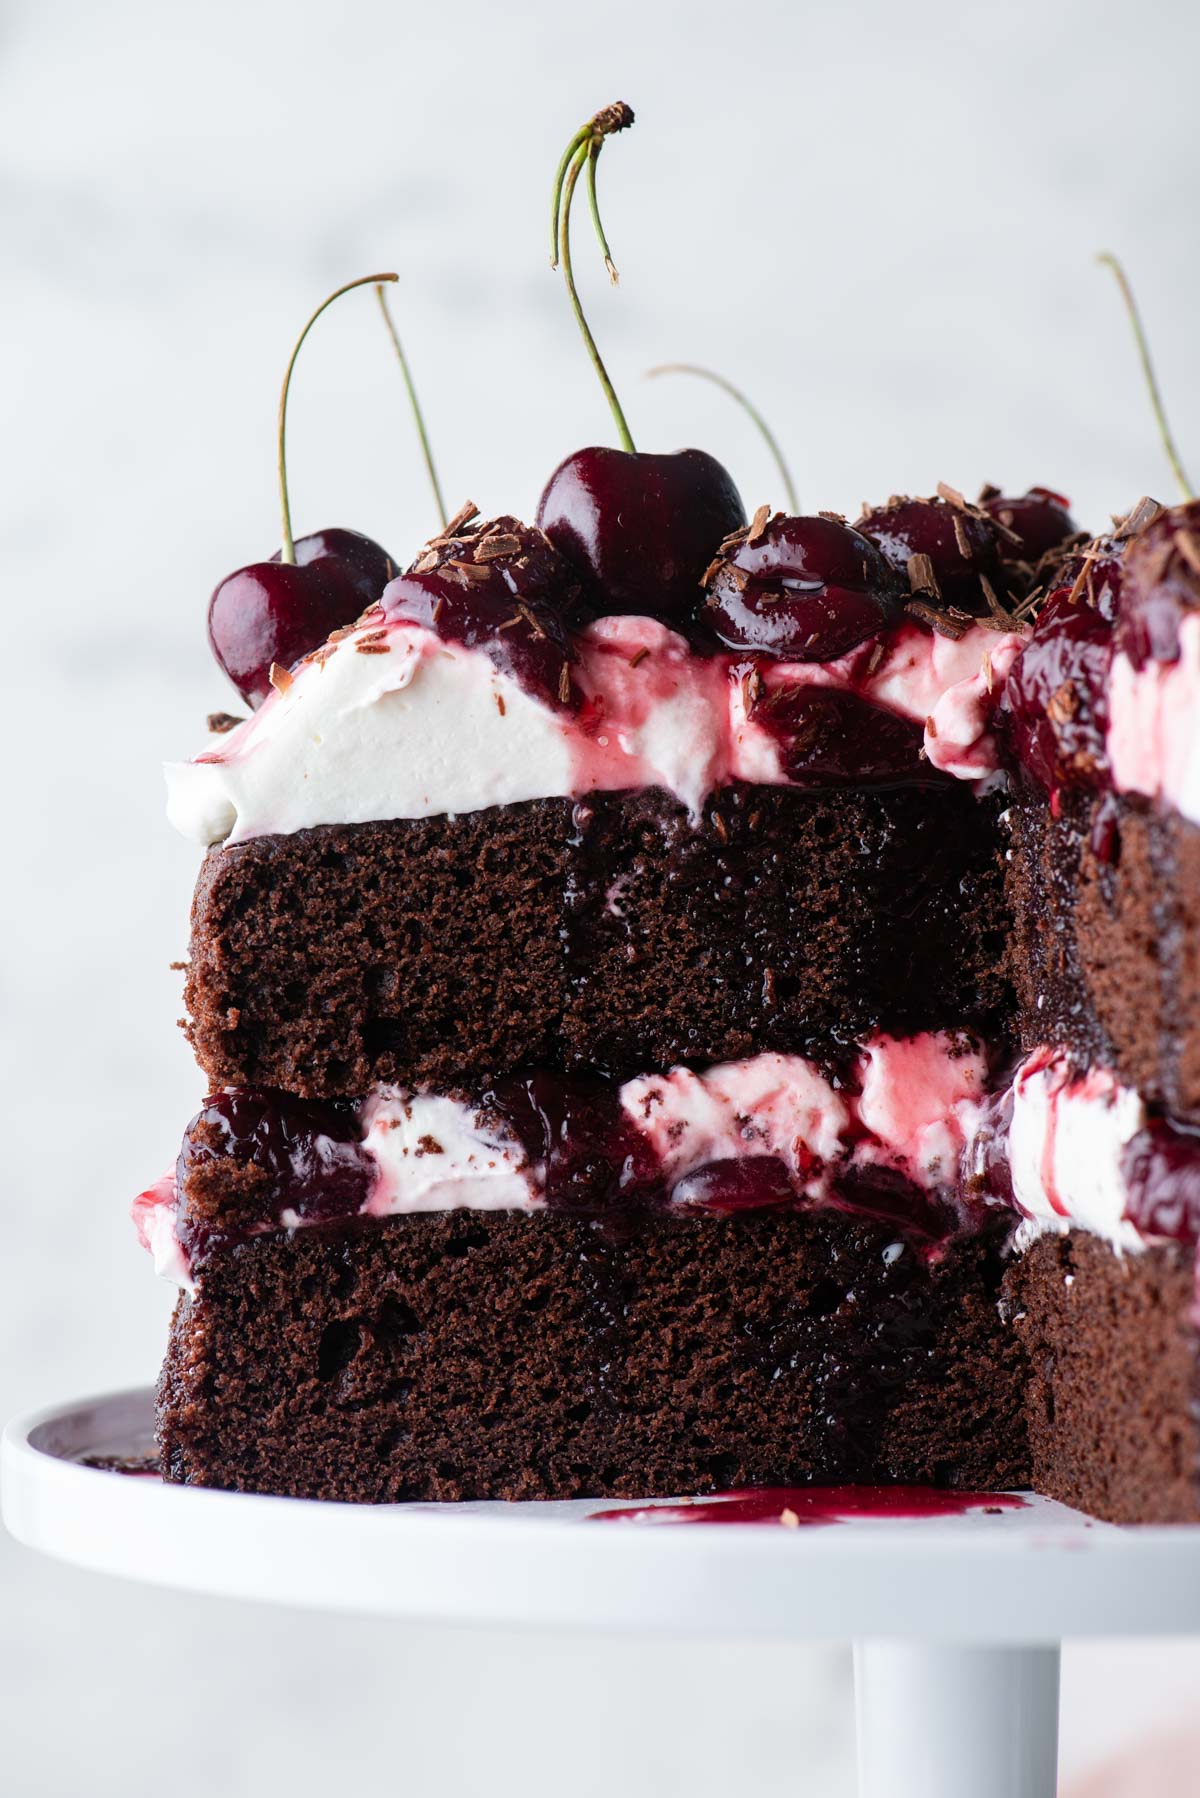 close up of a black forest cake with a large slice cut out, showing the layers of cake, whipped cream and cherry filling